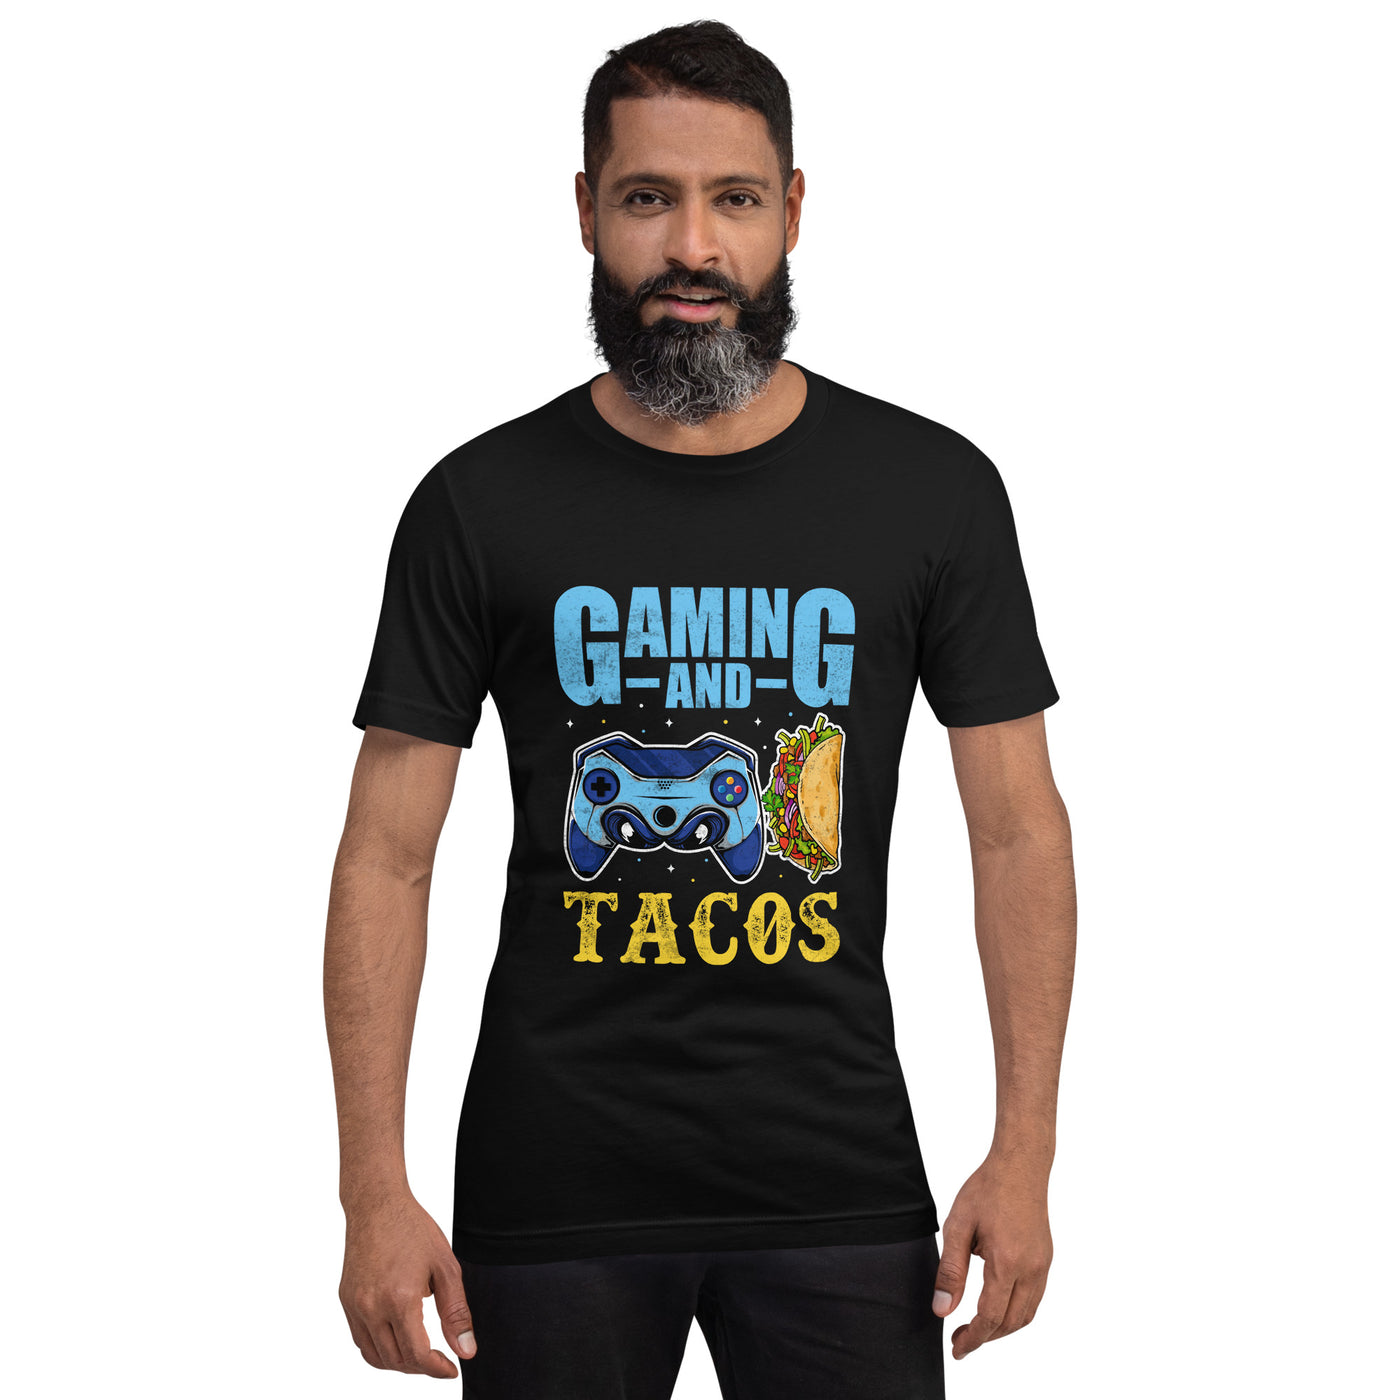 Gaming and Tacos - Unisex t-shirt